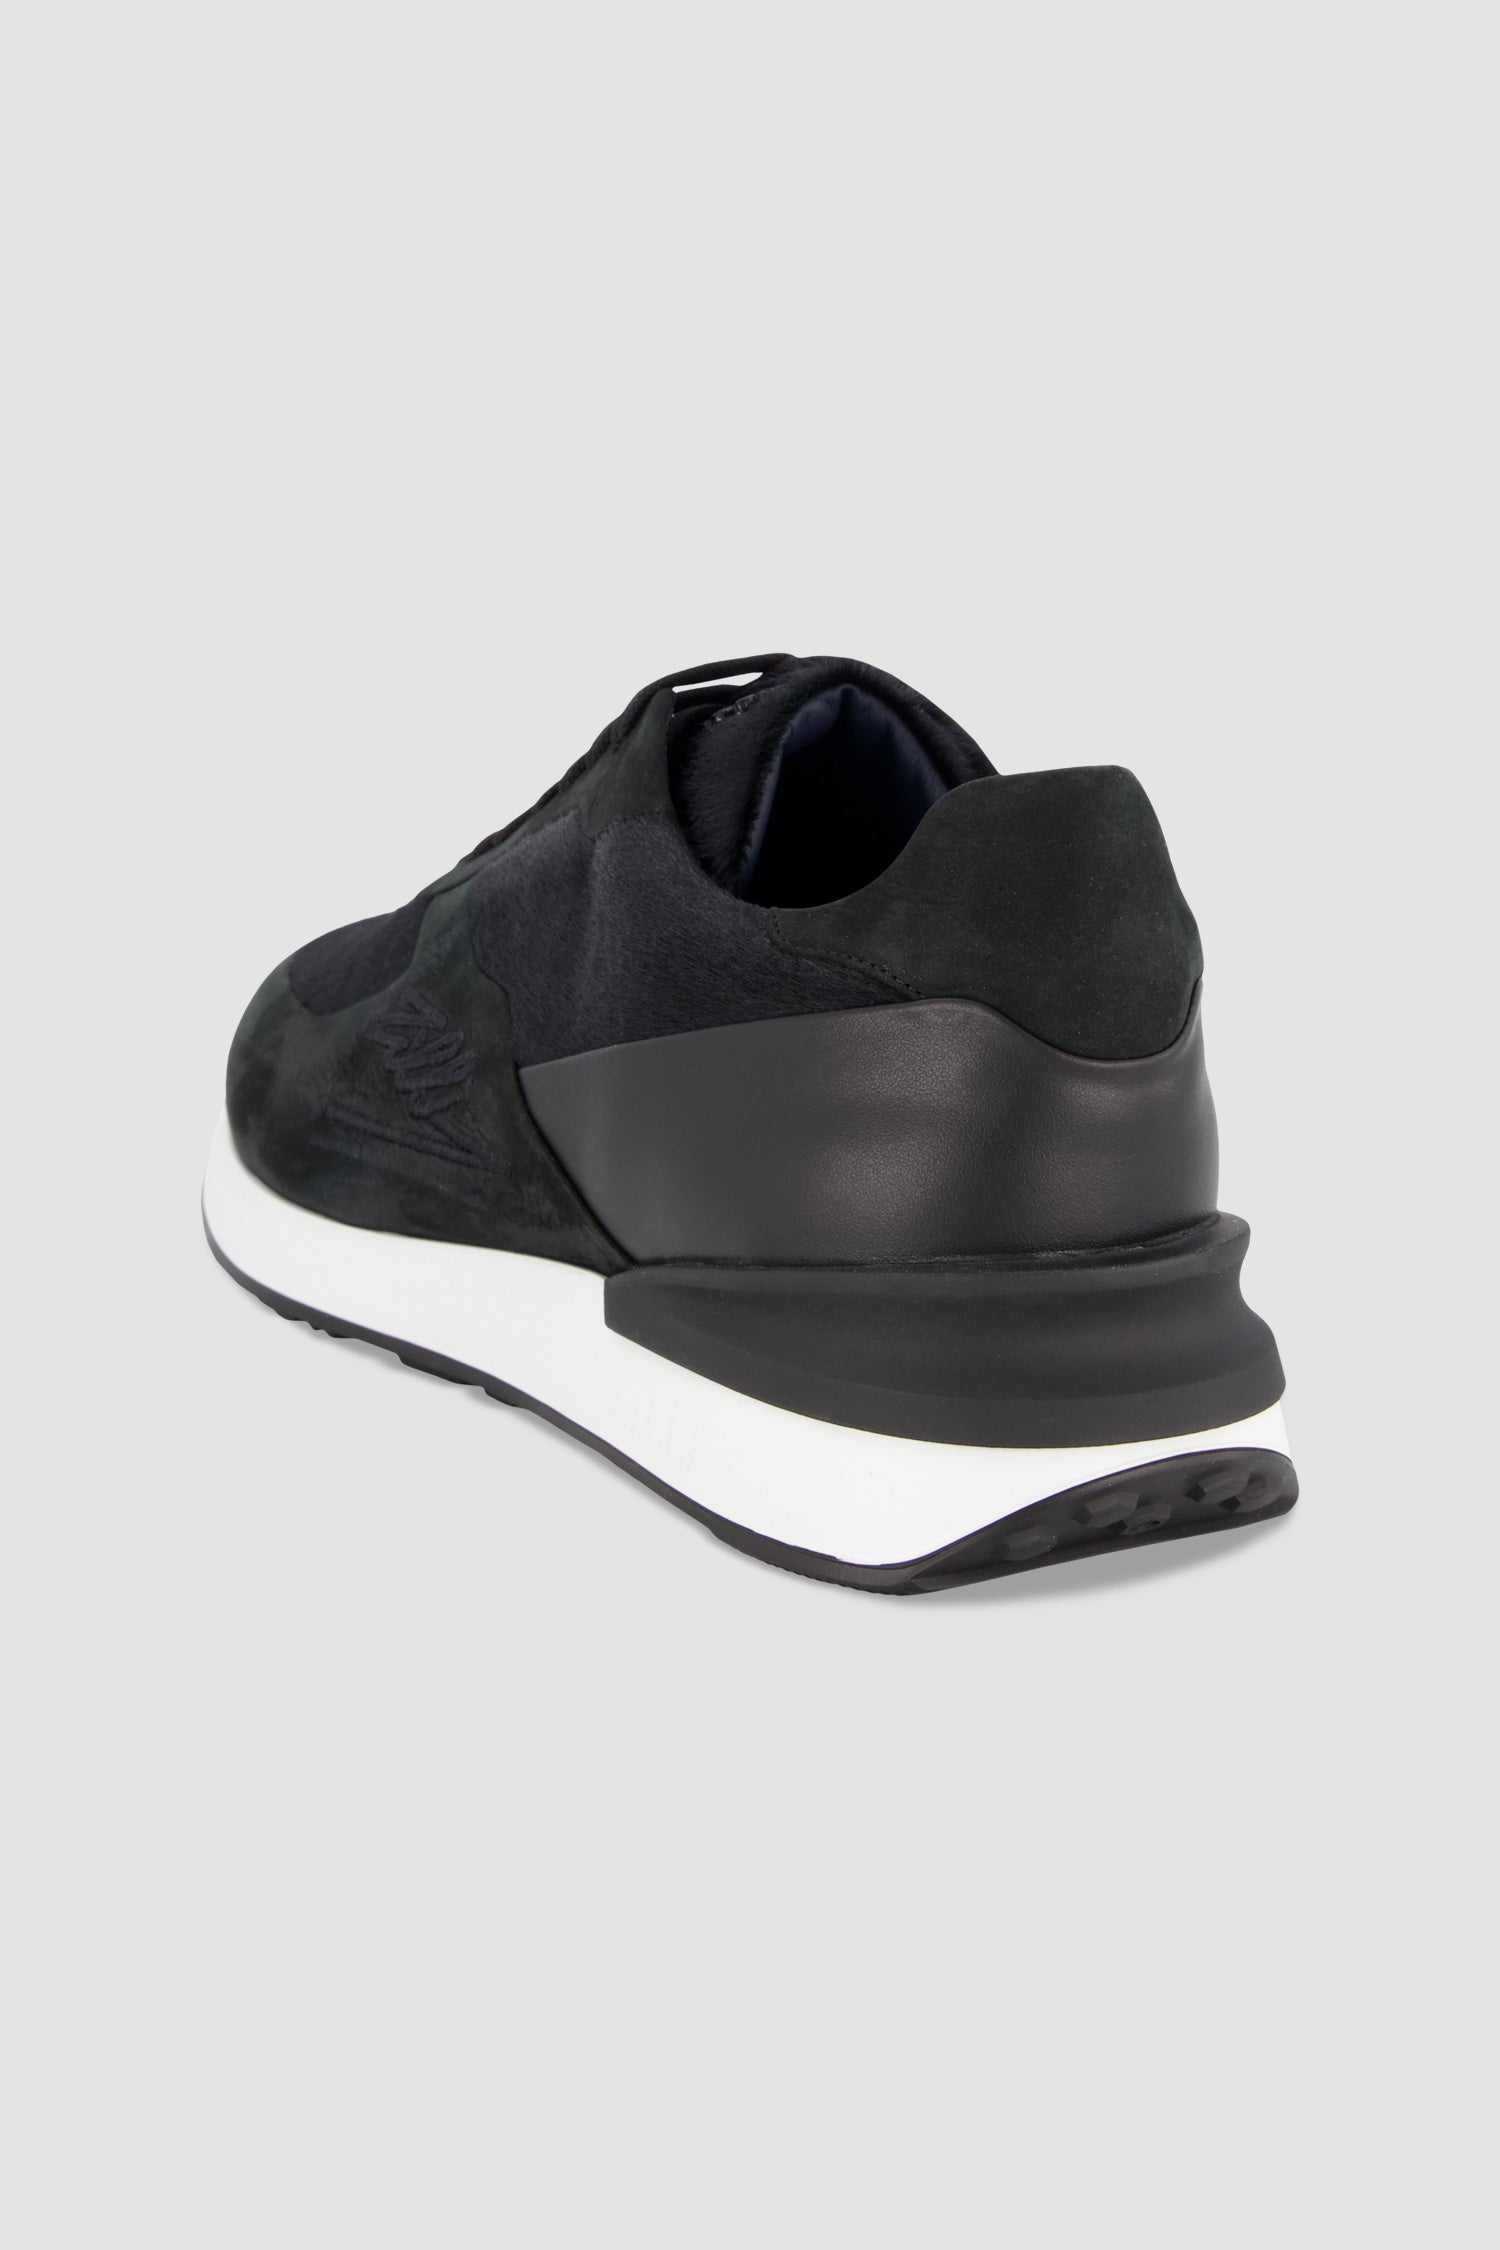 Zilli Black Leather and Suede Sneakers